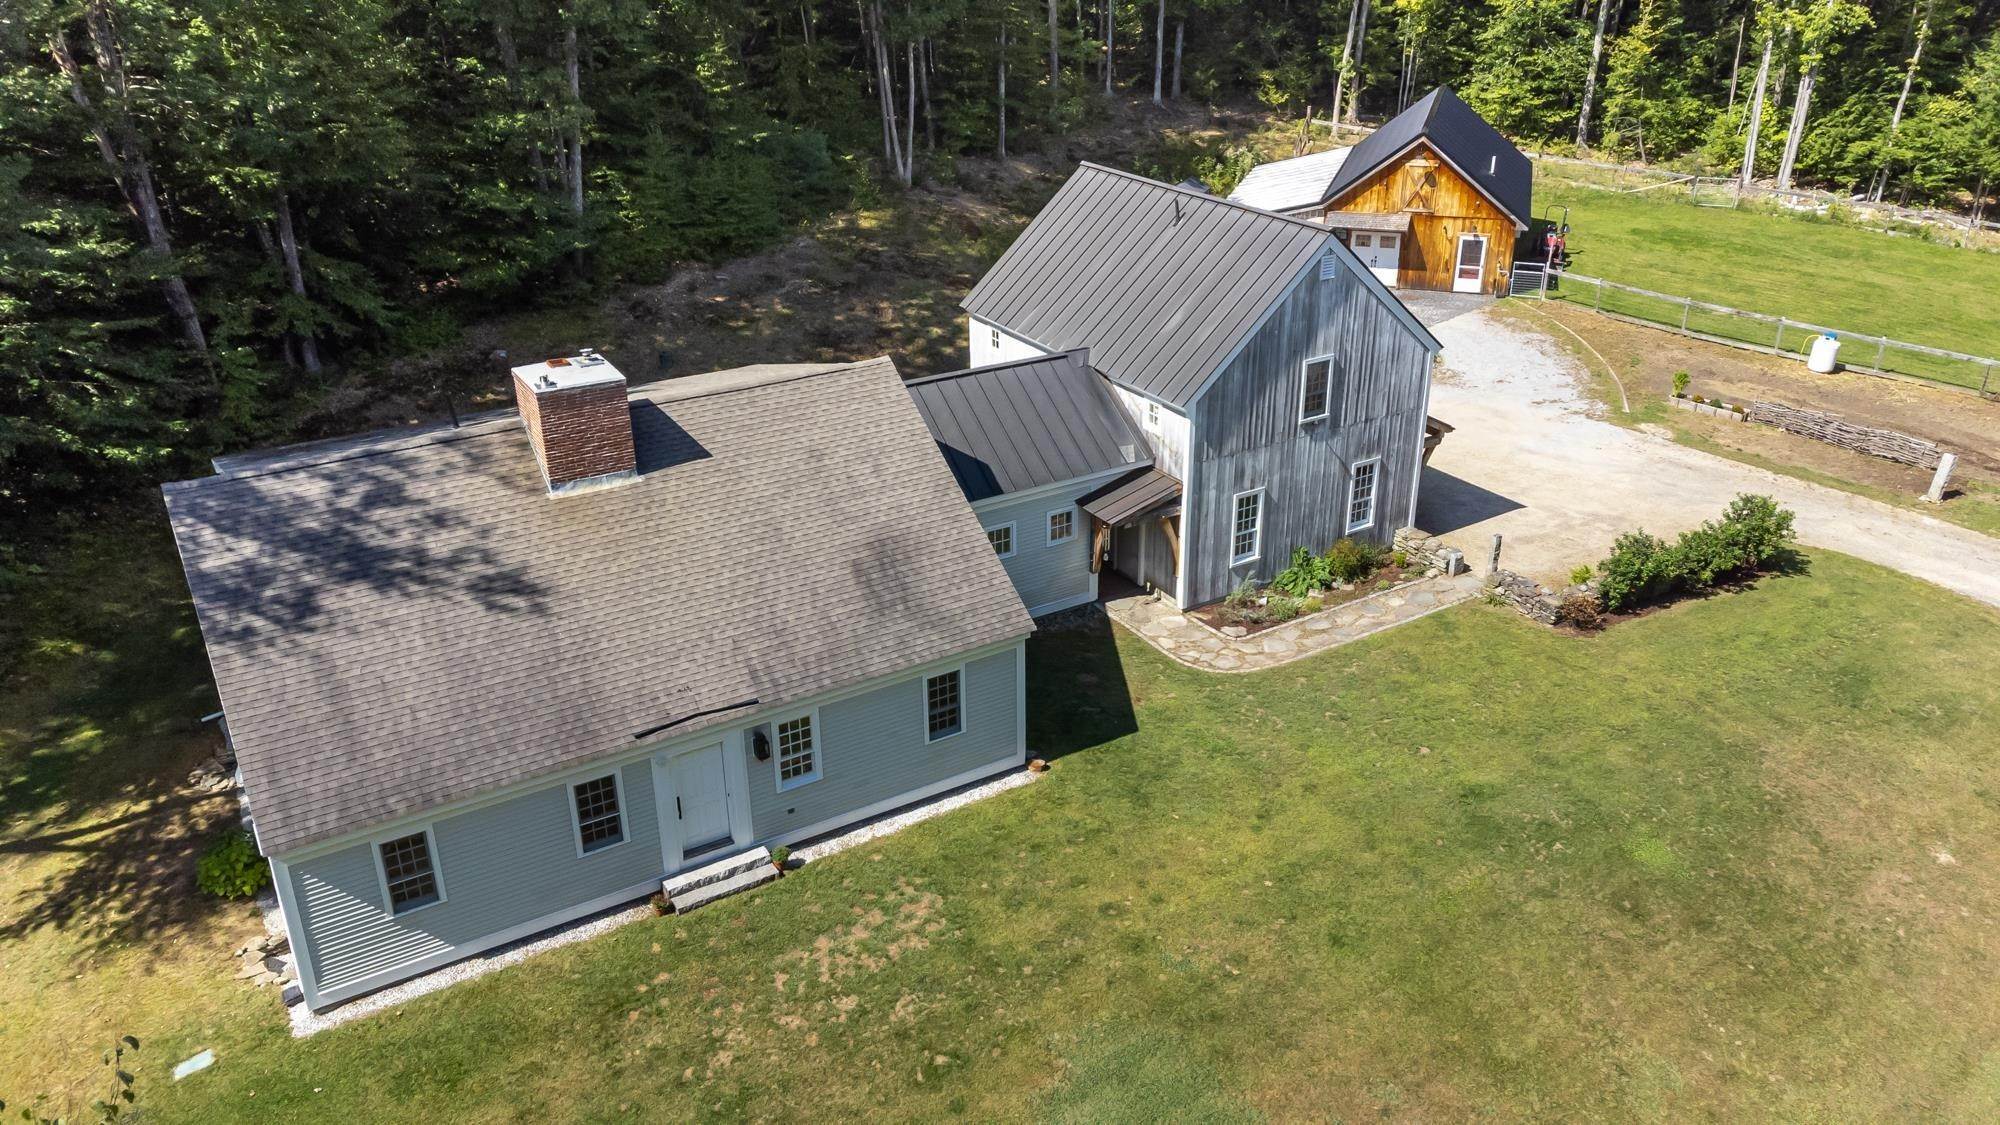 Single Family Homes for Sale at Hopkinton, NH 03229